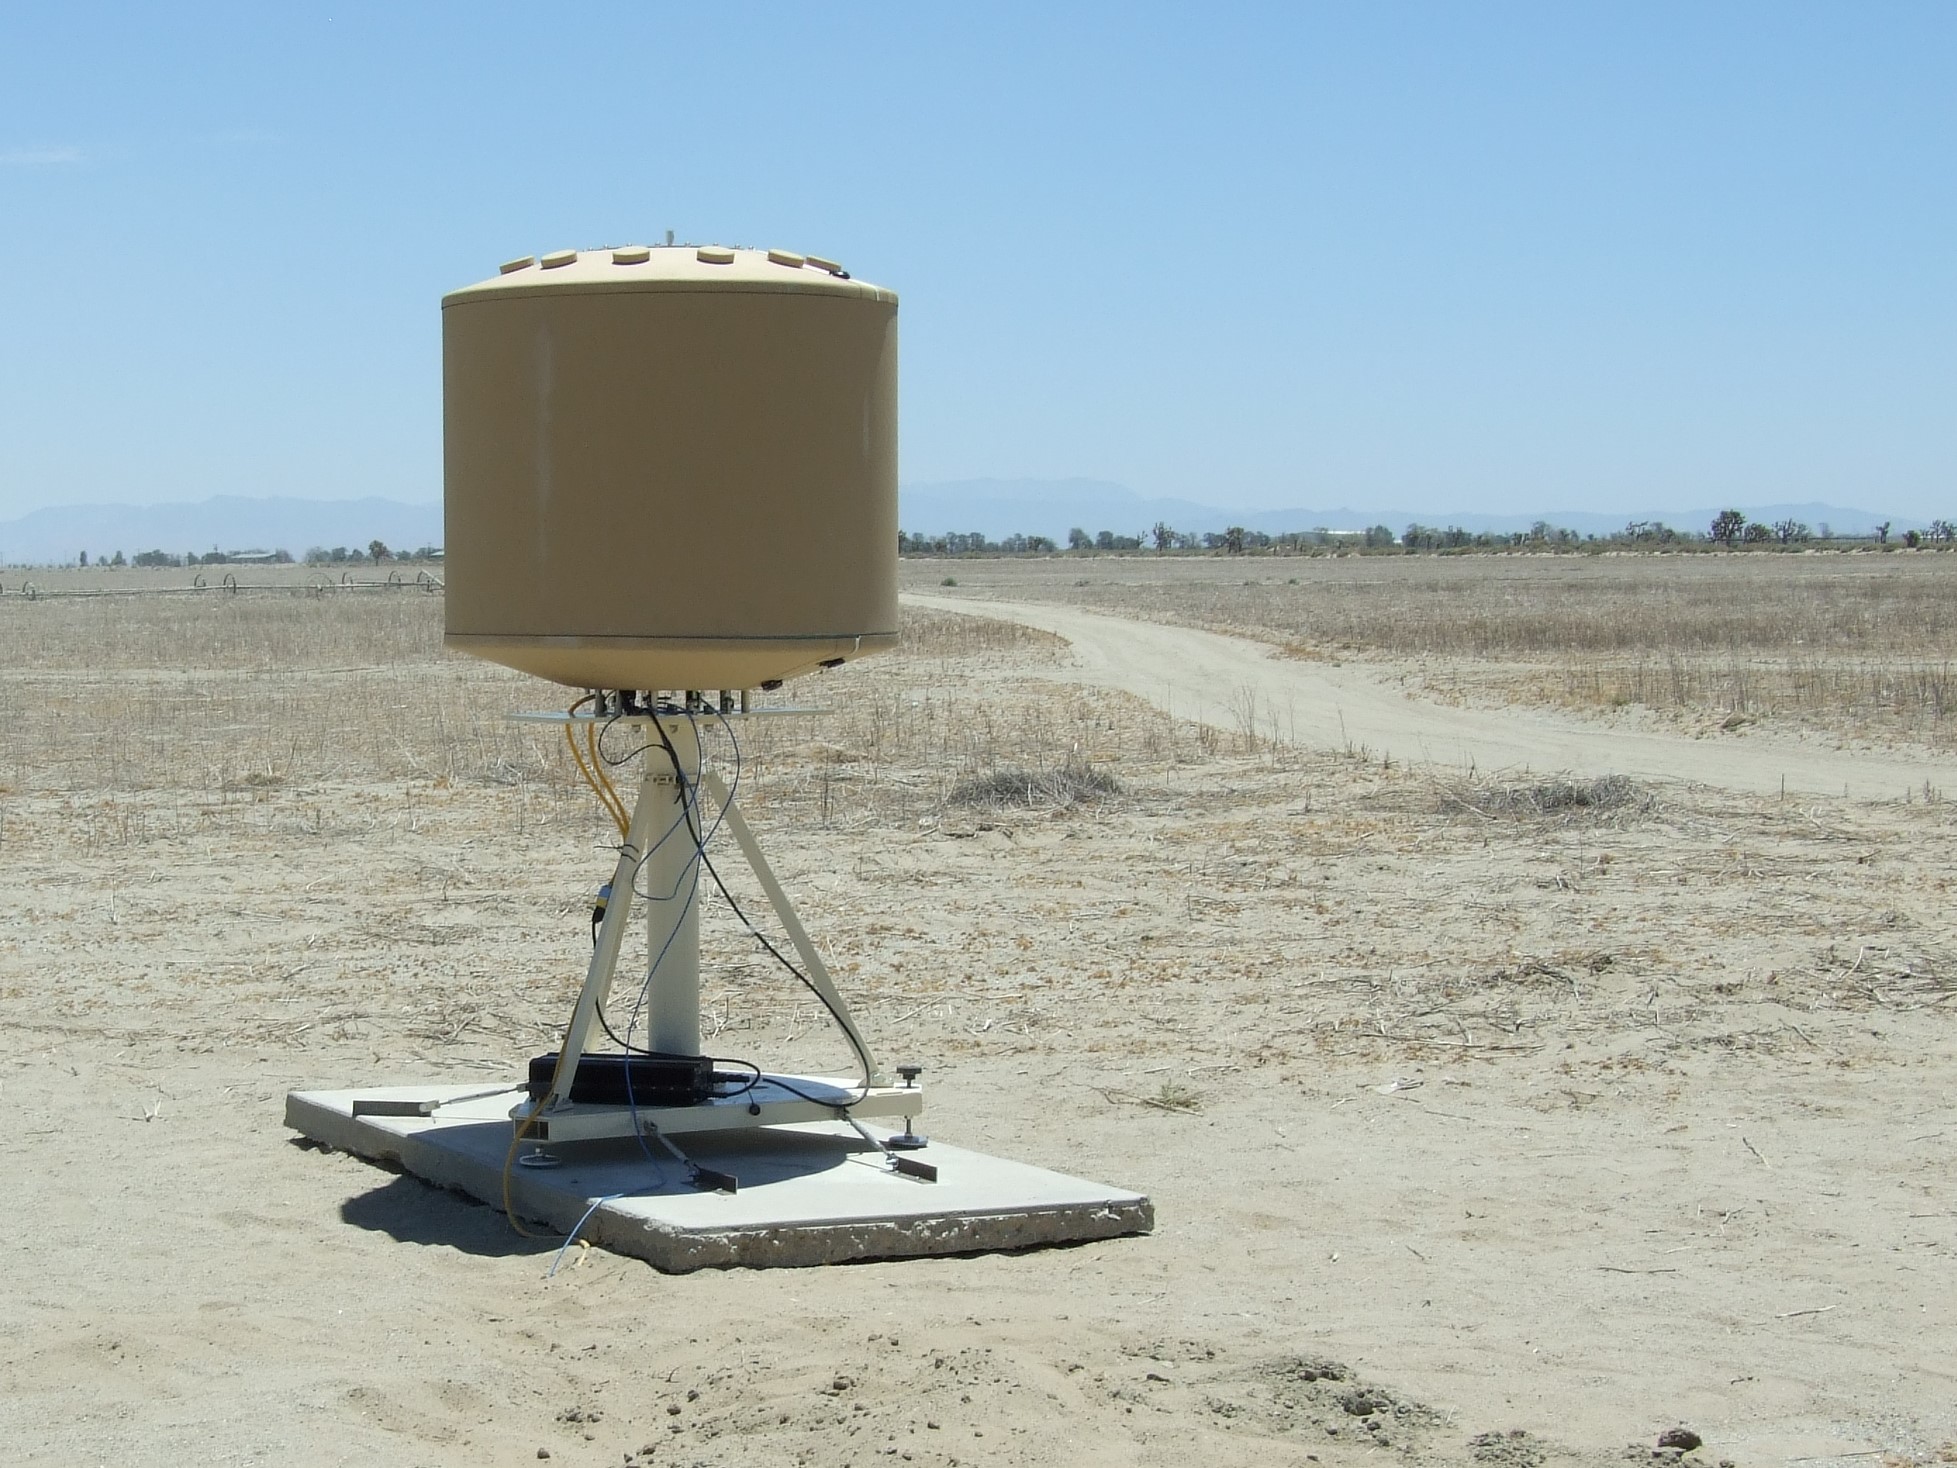 SRC's AN/TPQ-49 radar with LSTAR software in a rugged tan enclosure in front of a rugged desert landscape